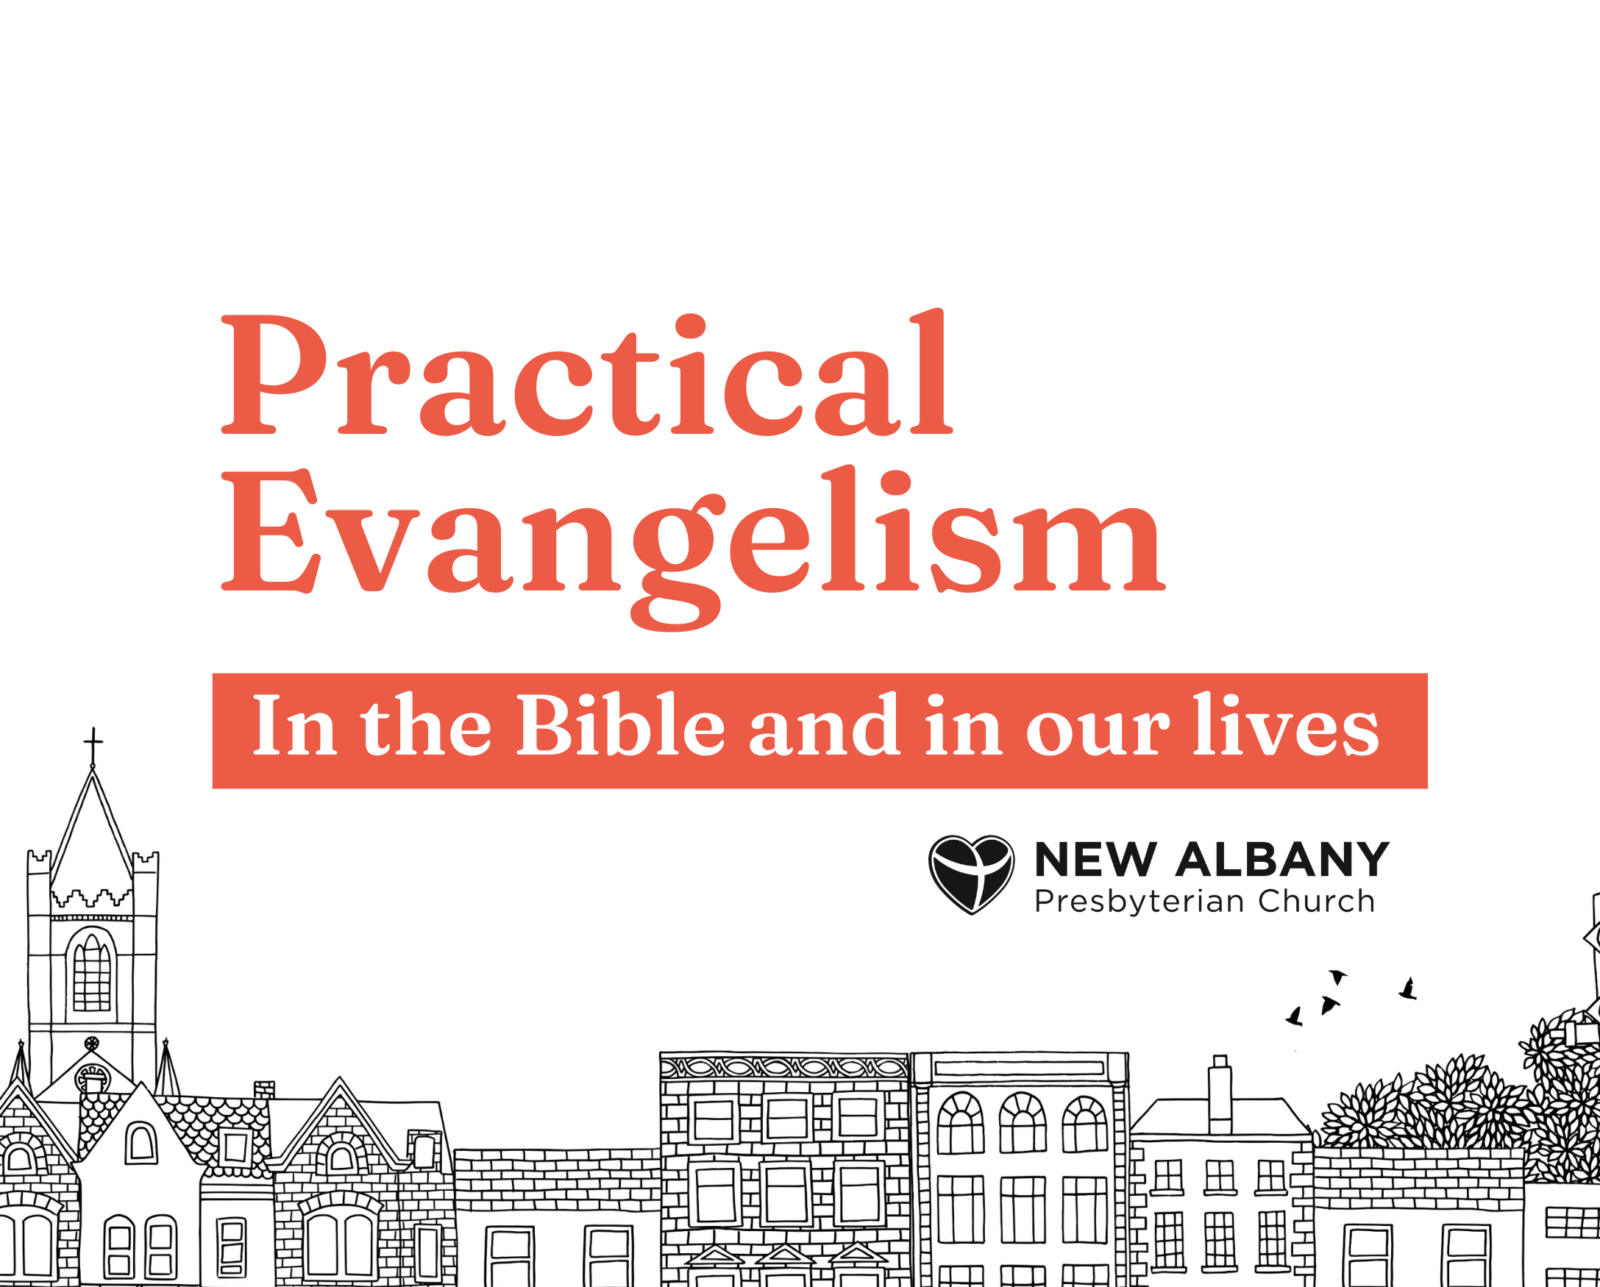 Practical Evangelism in the Bible and our lives